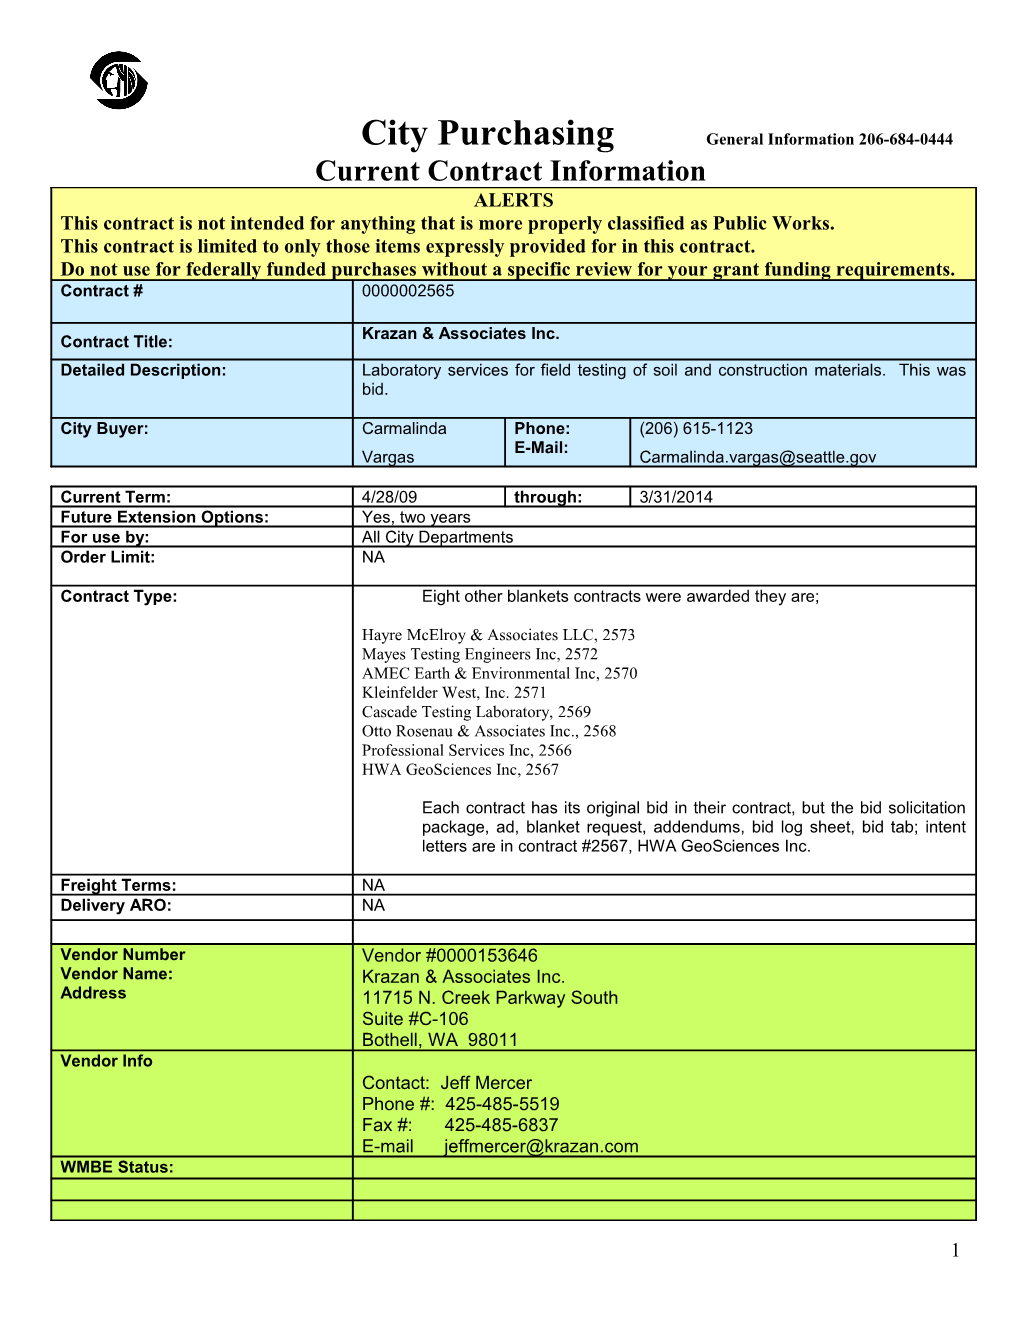 Current Contract Information Form s20